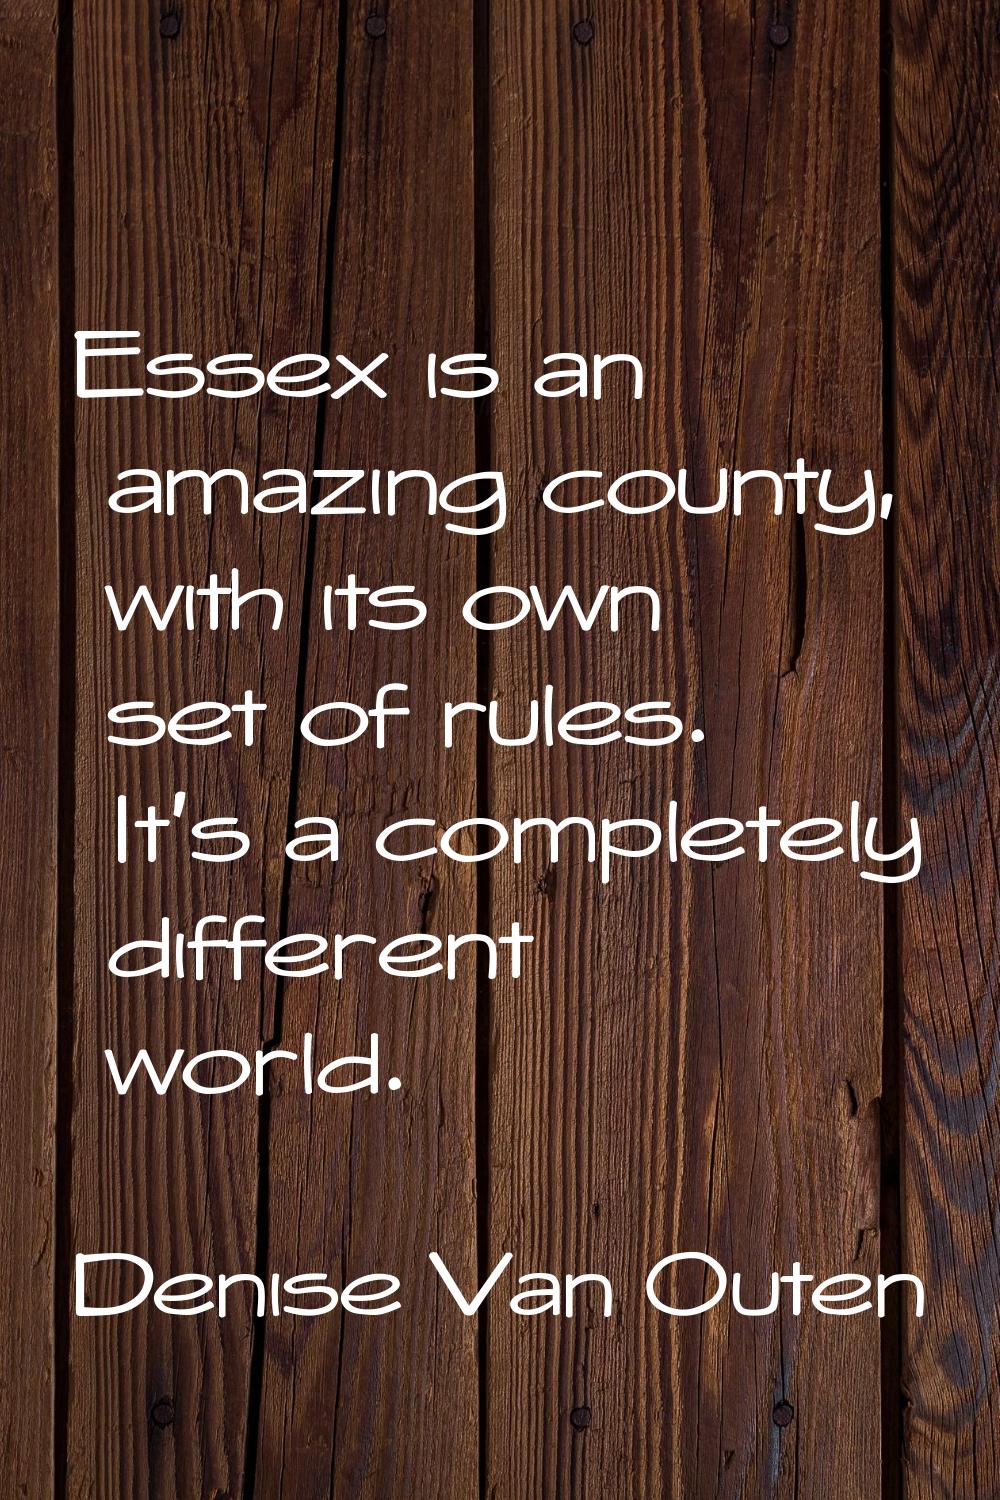 Essex is an amazing county, with its own set of rules. It's a completely different world.